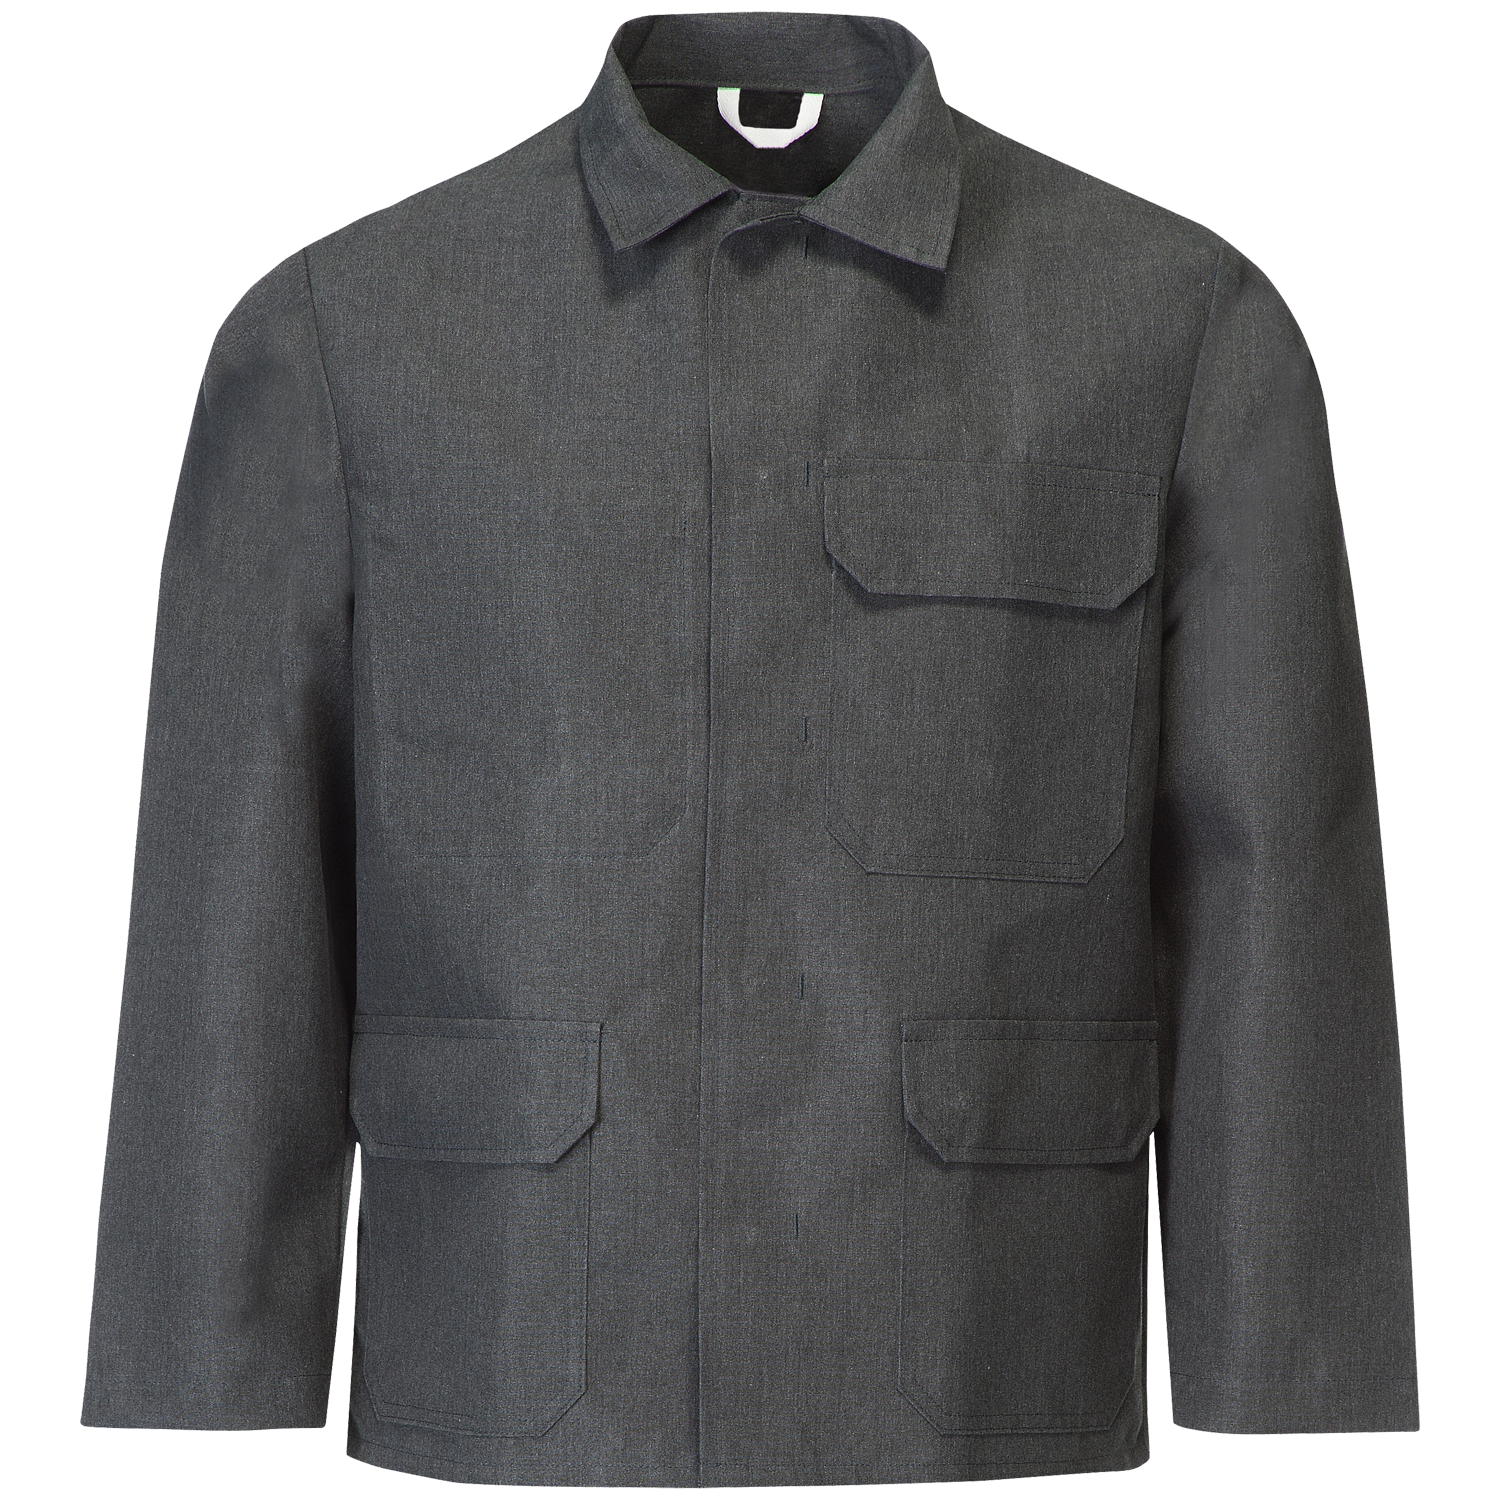 CWS Chemical Protection Work Jacket Grey